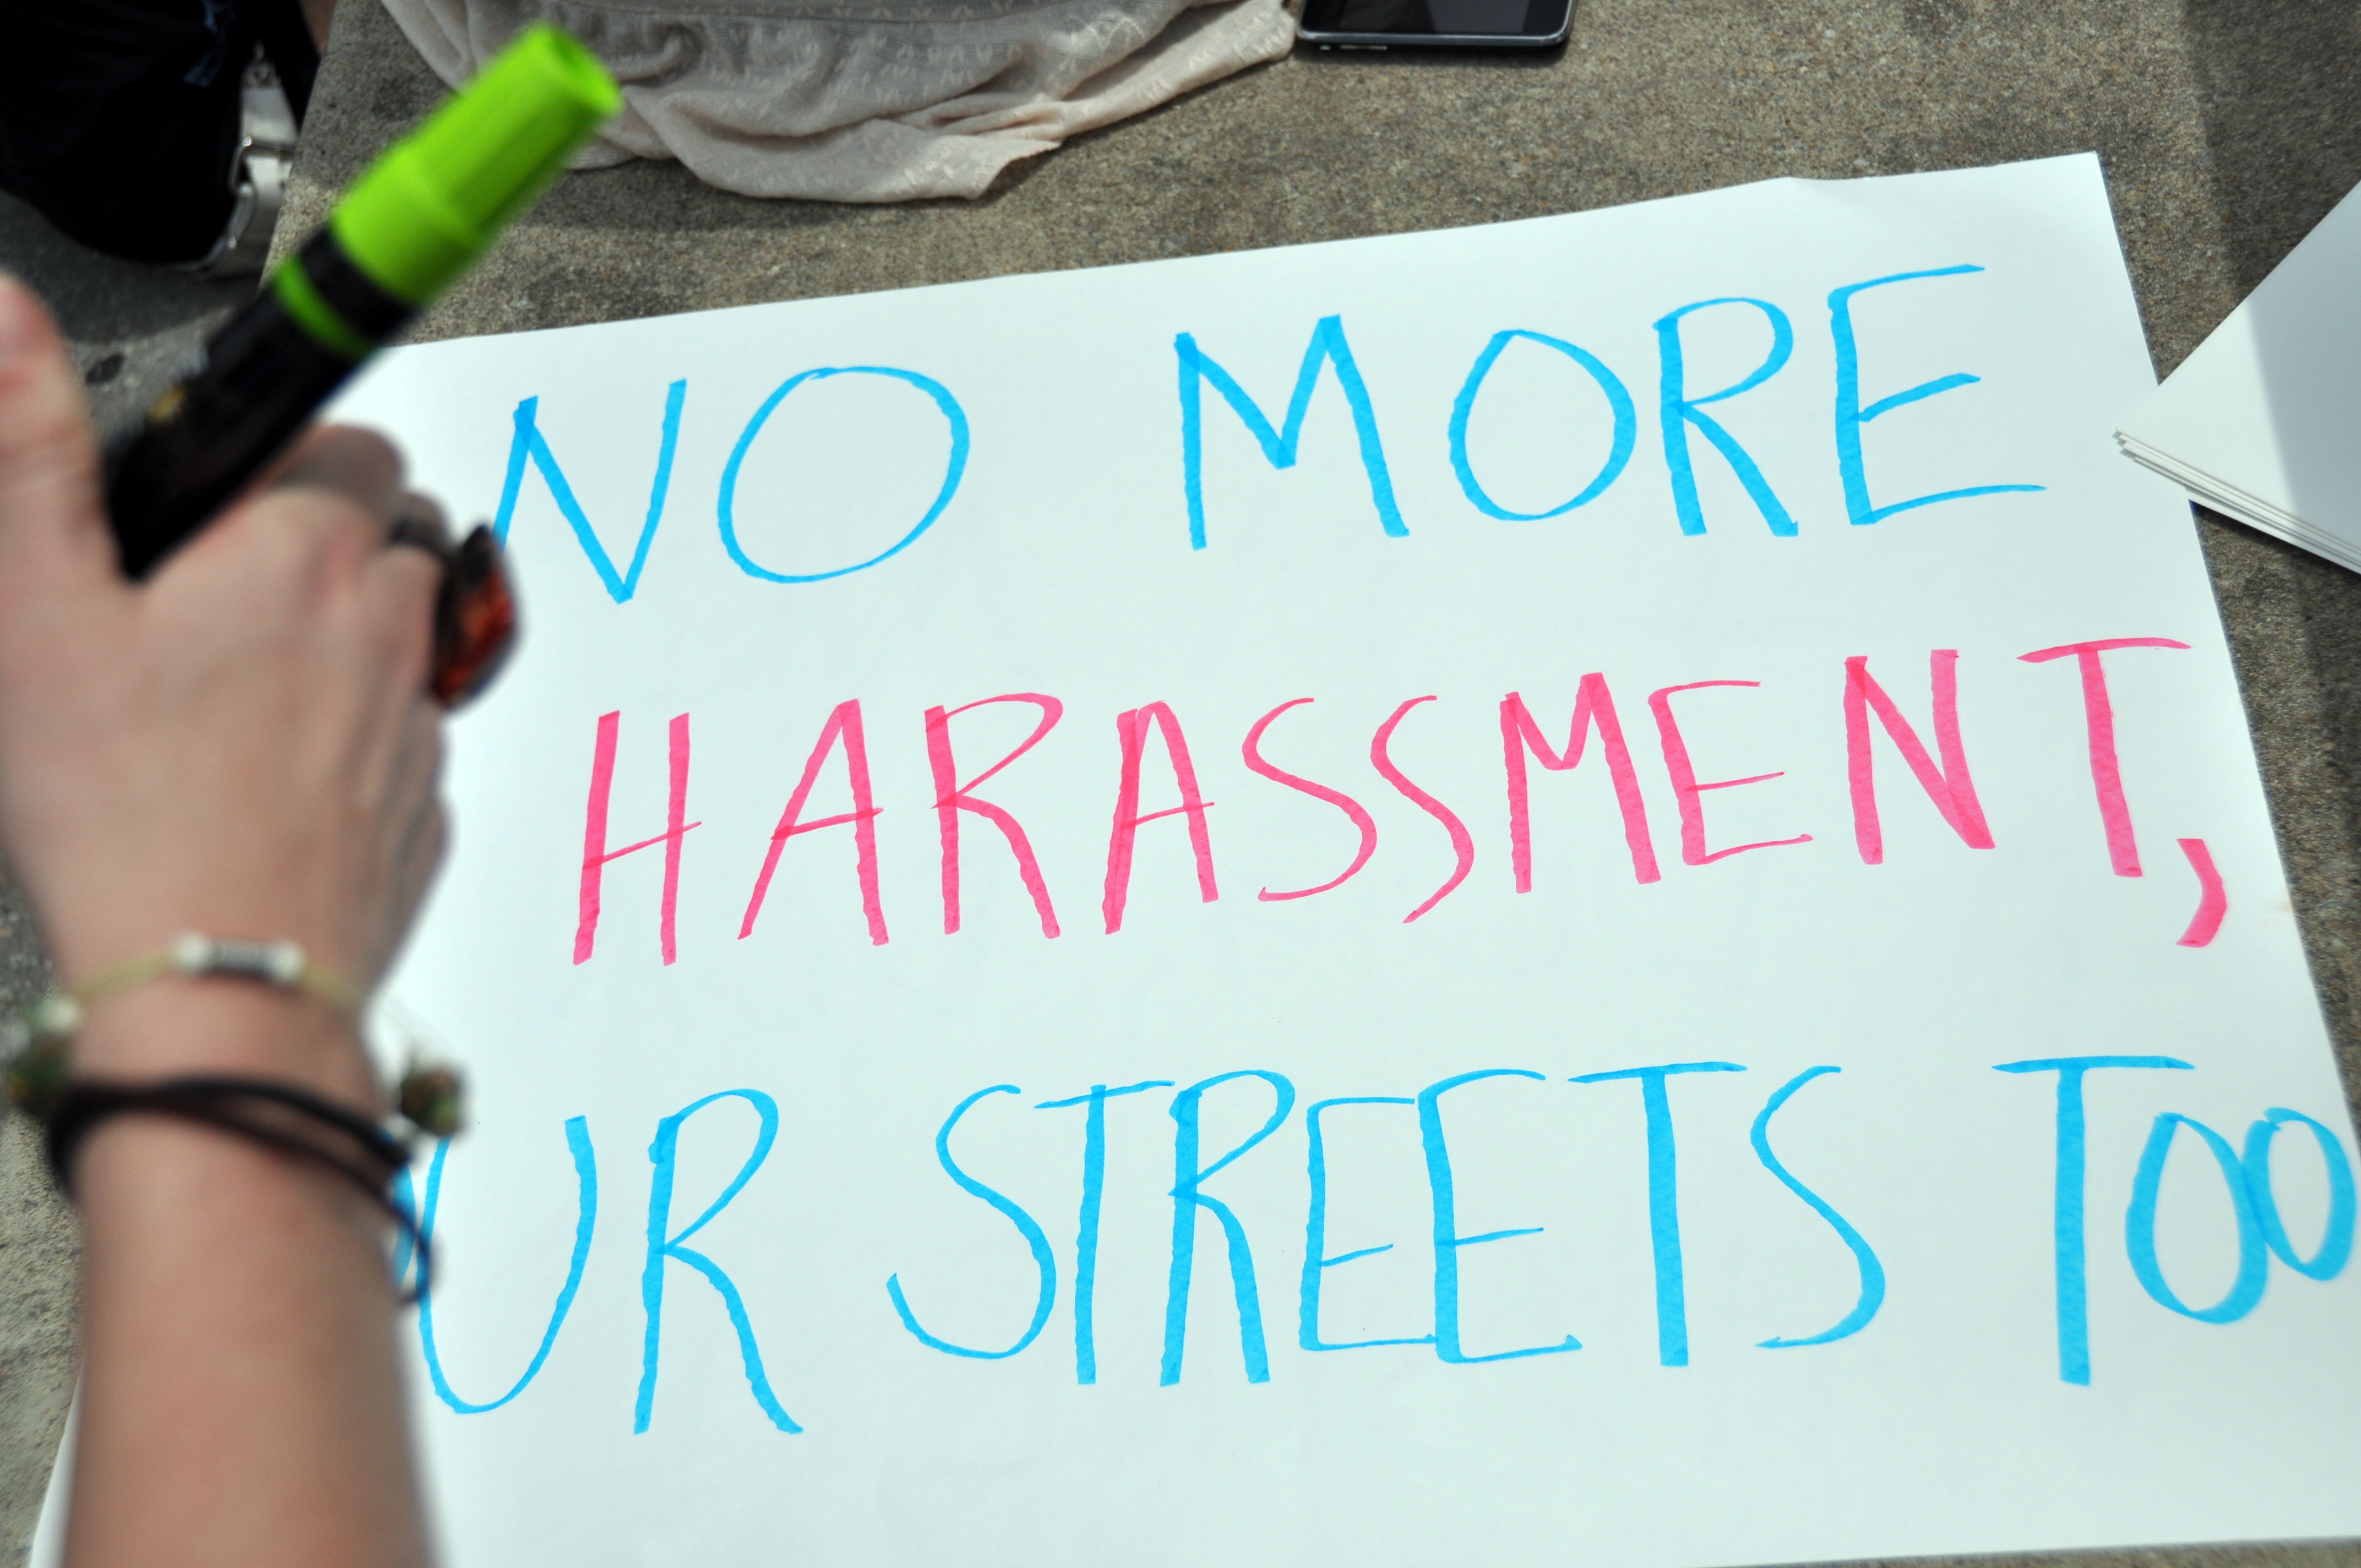 6 26 11 Anti Street Harassment March Dc By Mark 362 Stop Street 